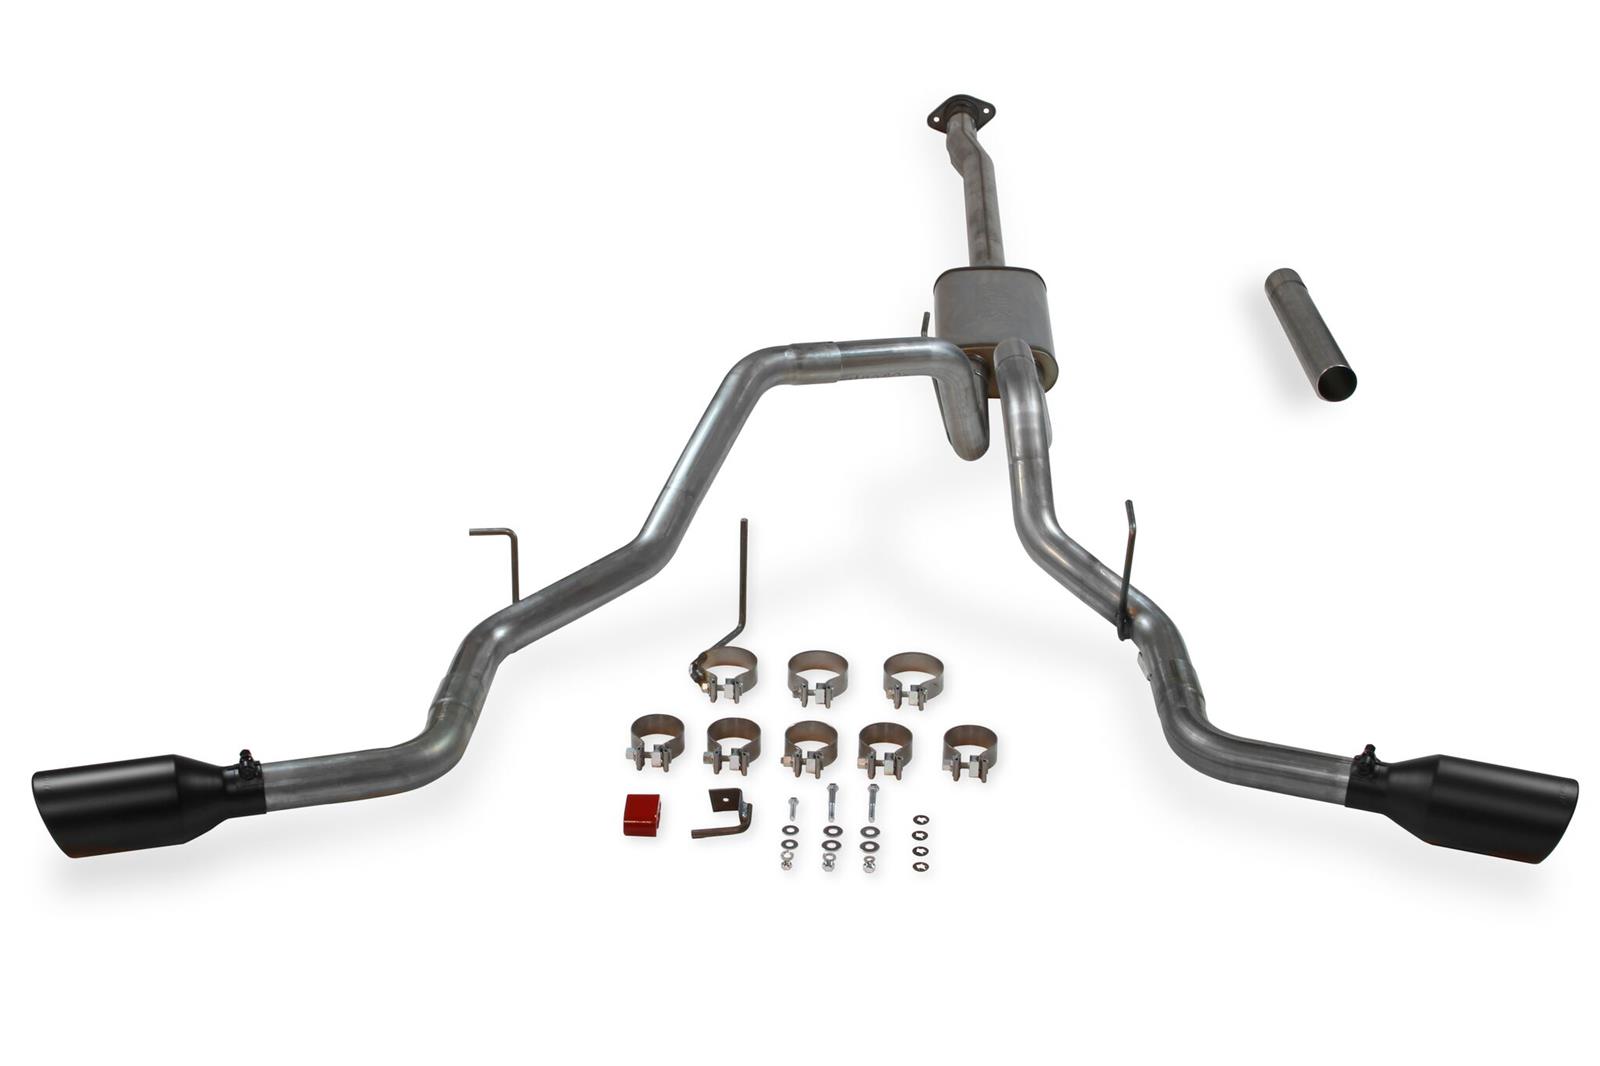 Flowmaster 717872 Flowmaster Flowfx Exhaust Systems Summit Racing